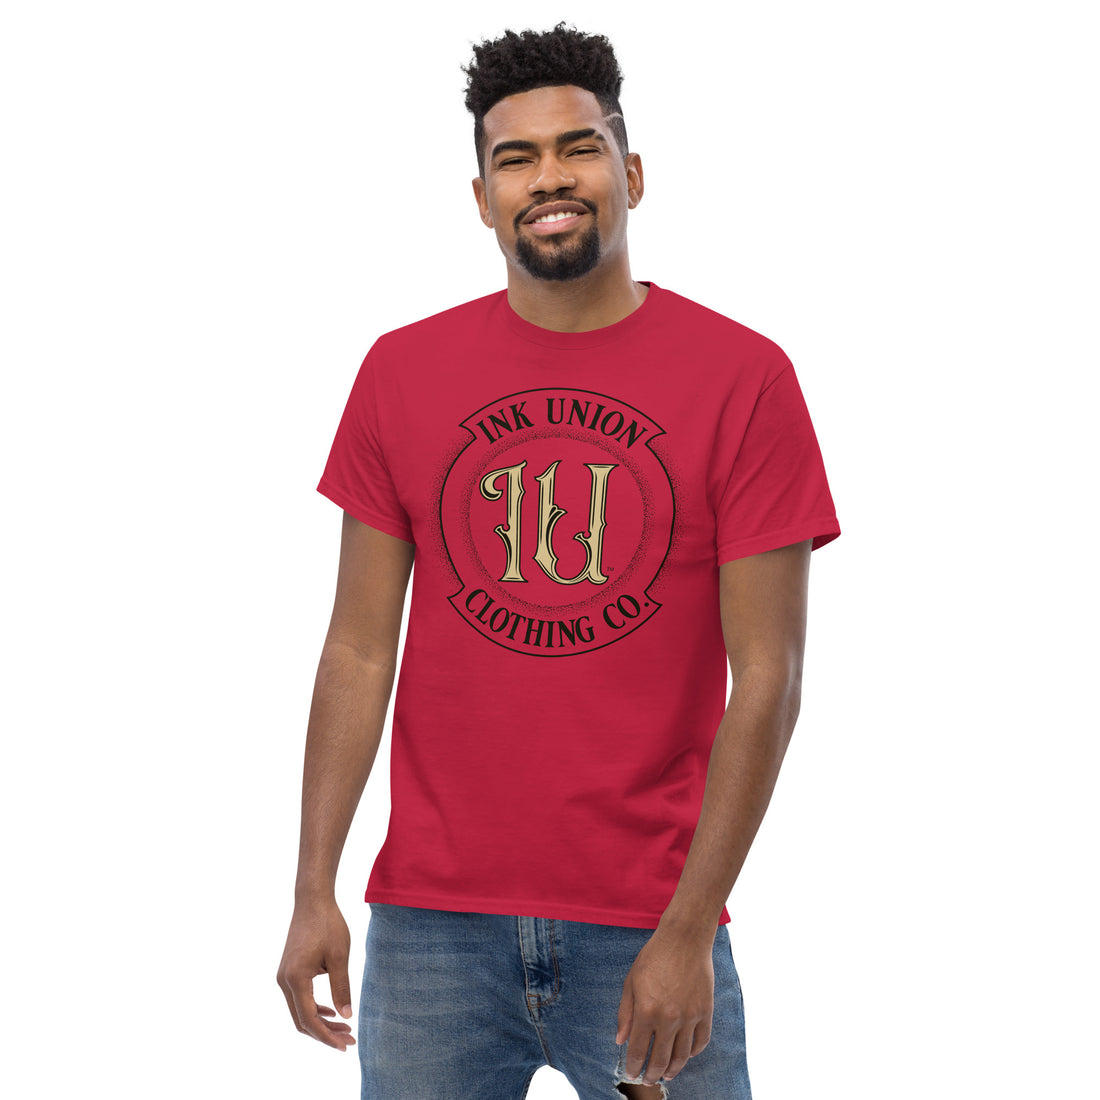 An attractive man is wearing a red t-shirt with the Ink Union Clothing Co Badge logo in black and gold.